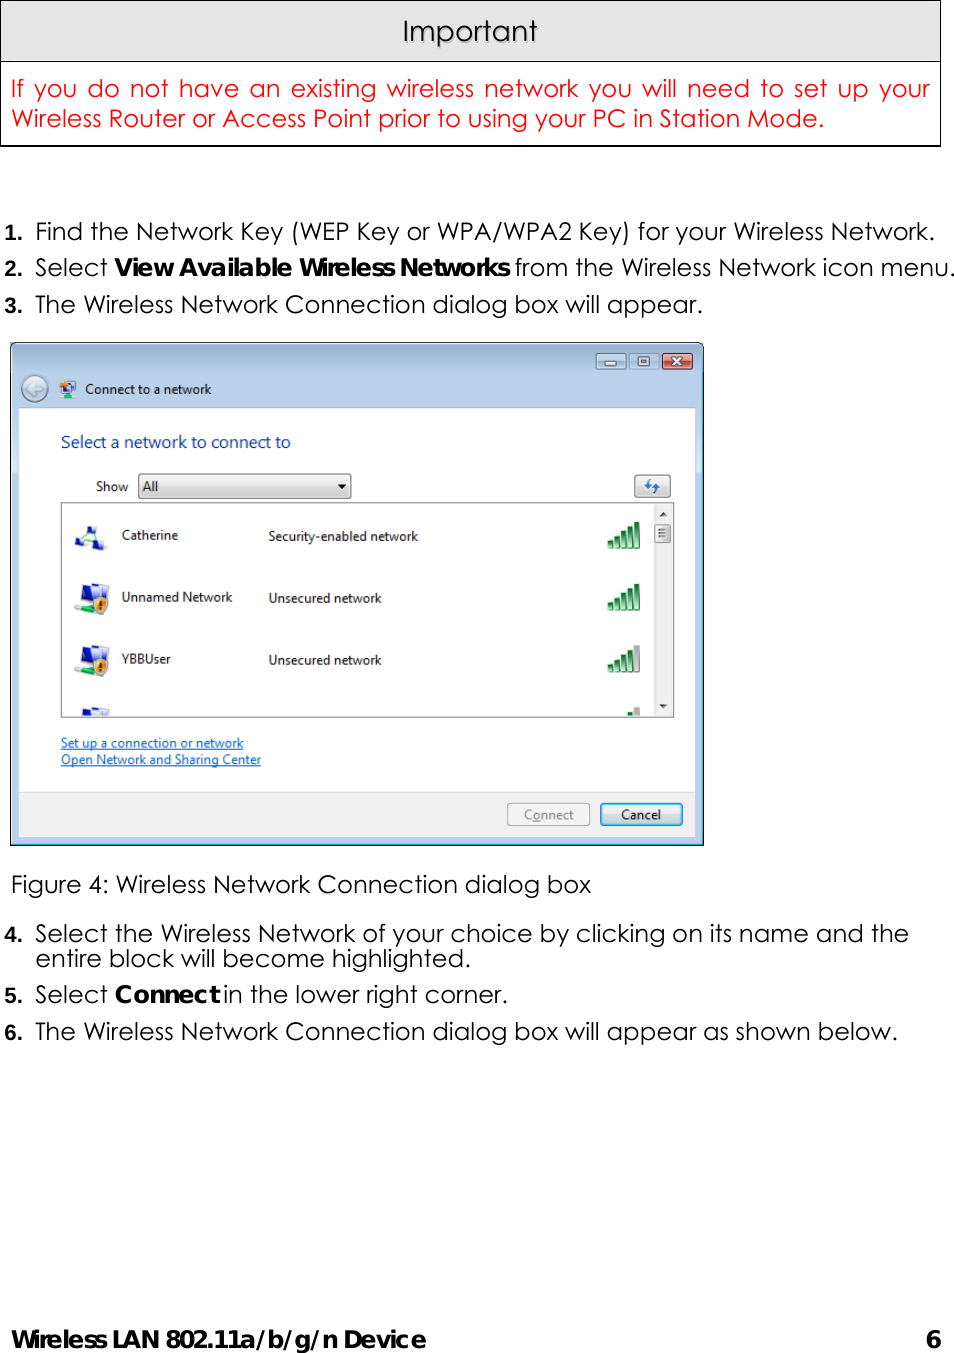 Wireless LAN 802.11a/b/g/n Device                                         6  IImmppoorrttaanntt  If you do not have an existing wireless network you will need to set up your Wireless Router or Access Point prior to using your PC in Station Mode.  1.  Find the Network Key (WEP Key or WPA/WPA2 Key) for your Wireless Network. 2.  Select View Available Wireless Networks from the Wireless Network icon menu. 3.  The Wireless Network Connection dialog box will appear.    Figure 4: Wireless Network Connection dialog box 4.  Select the Wireless Network of your choice by clicking on its name and the entire block will become highlighted. 5.  Select Connect in the lower right corner. 6.  The Wireless Network Connection dialog box will appear as shown below. 